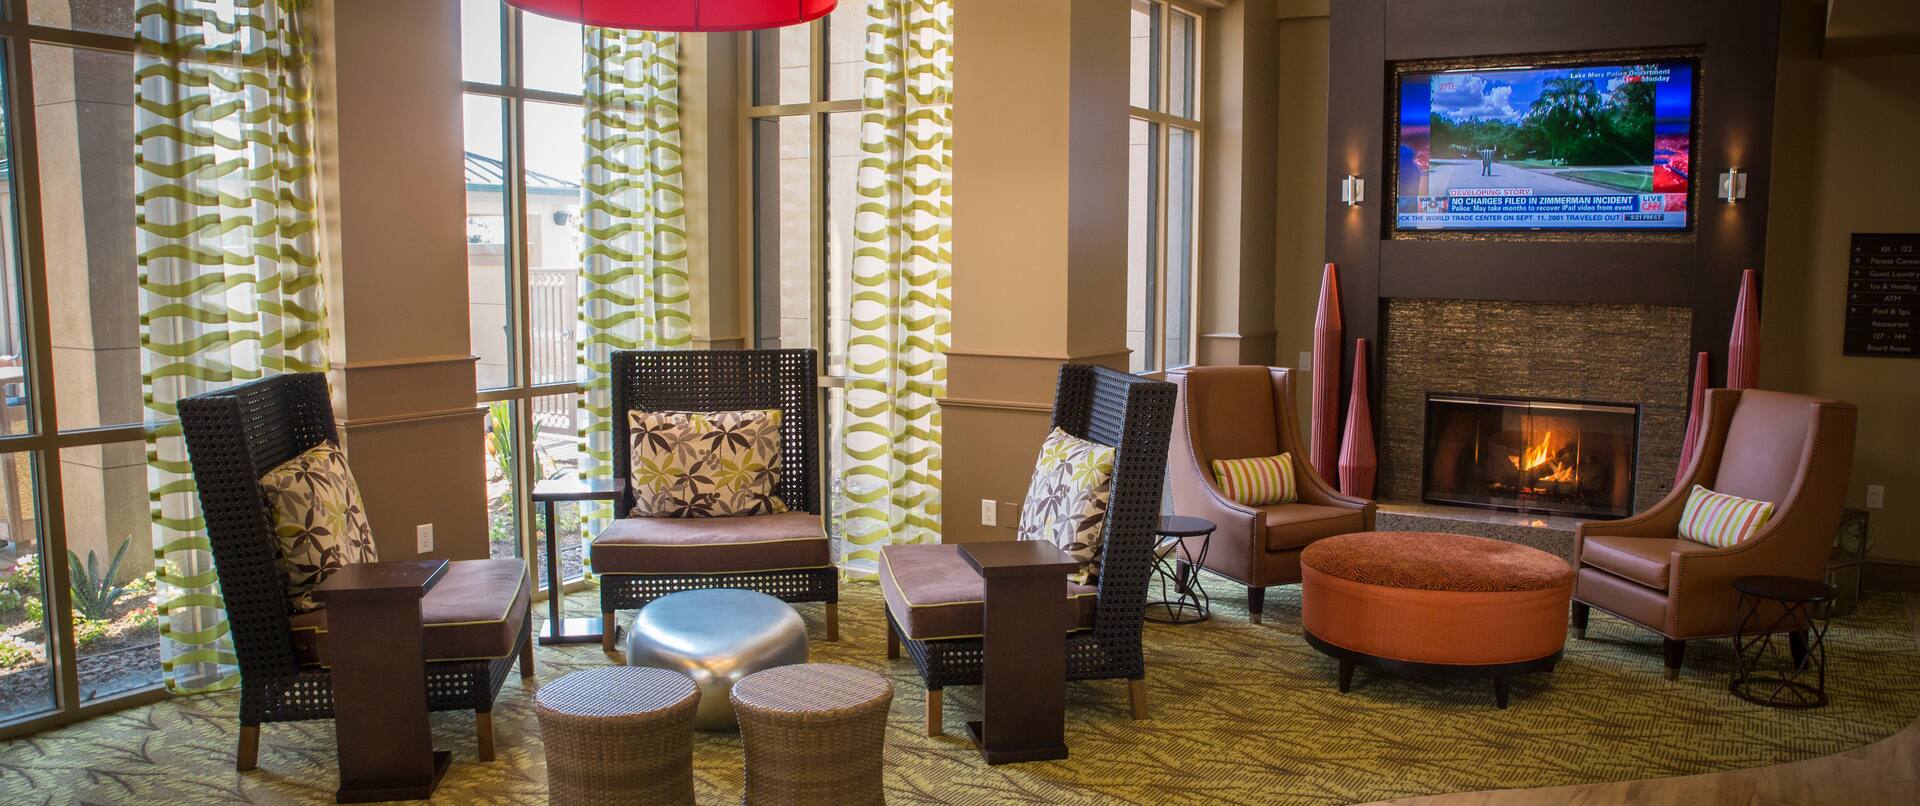 Soft Seating by Windows, and Two Armchairs With Round Ottoman by TV Above Fireplace in Lobby Lounge Area